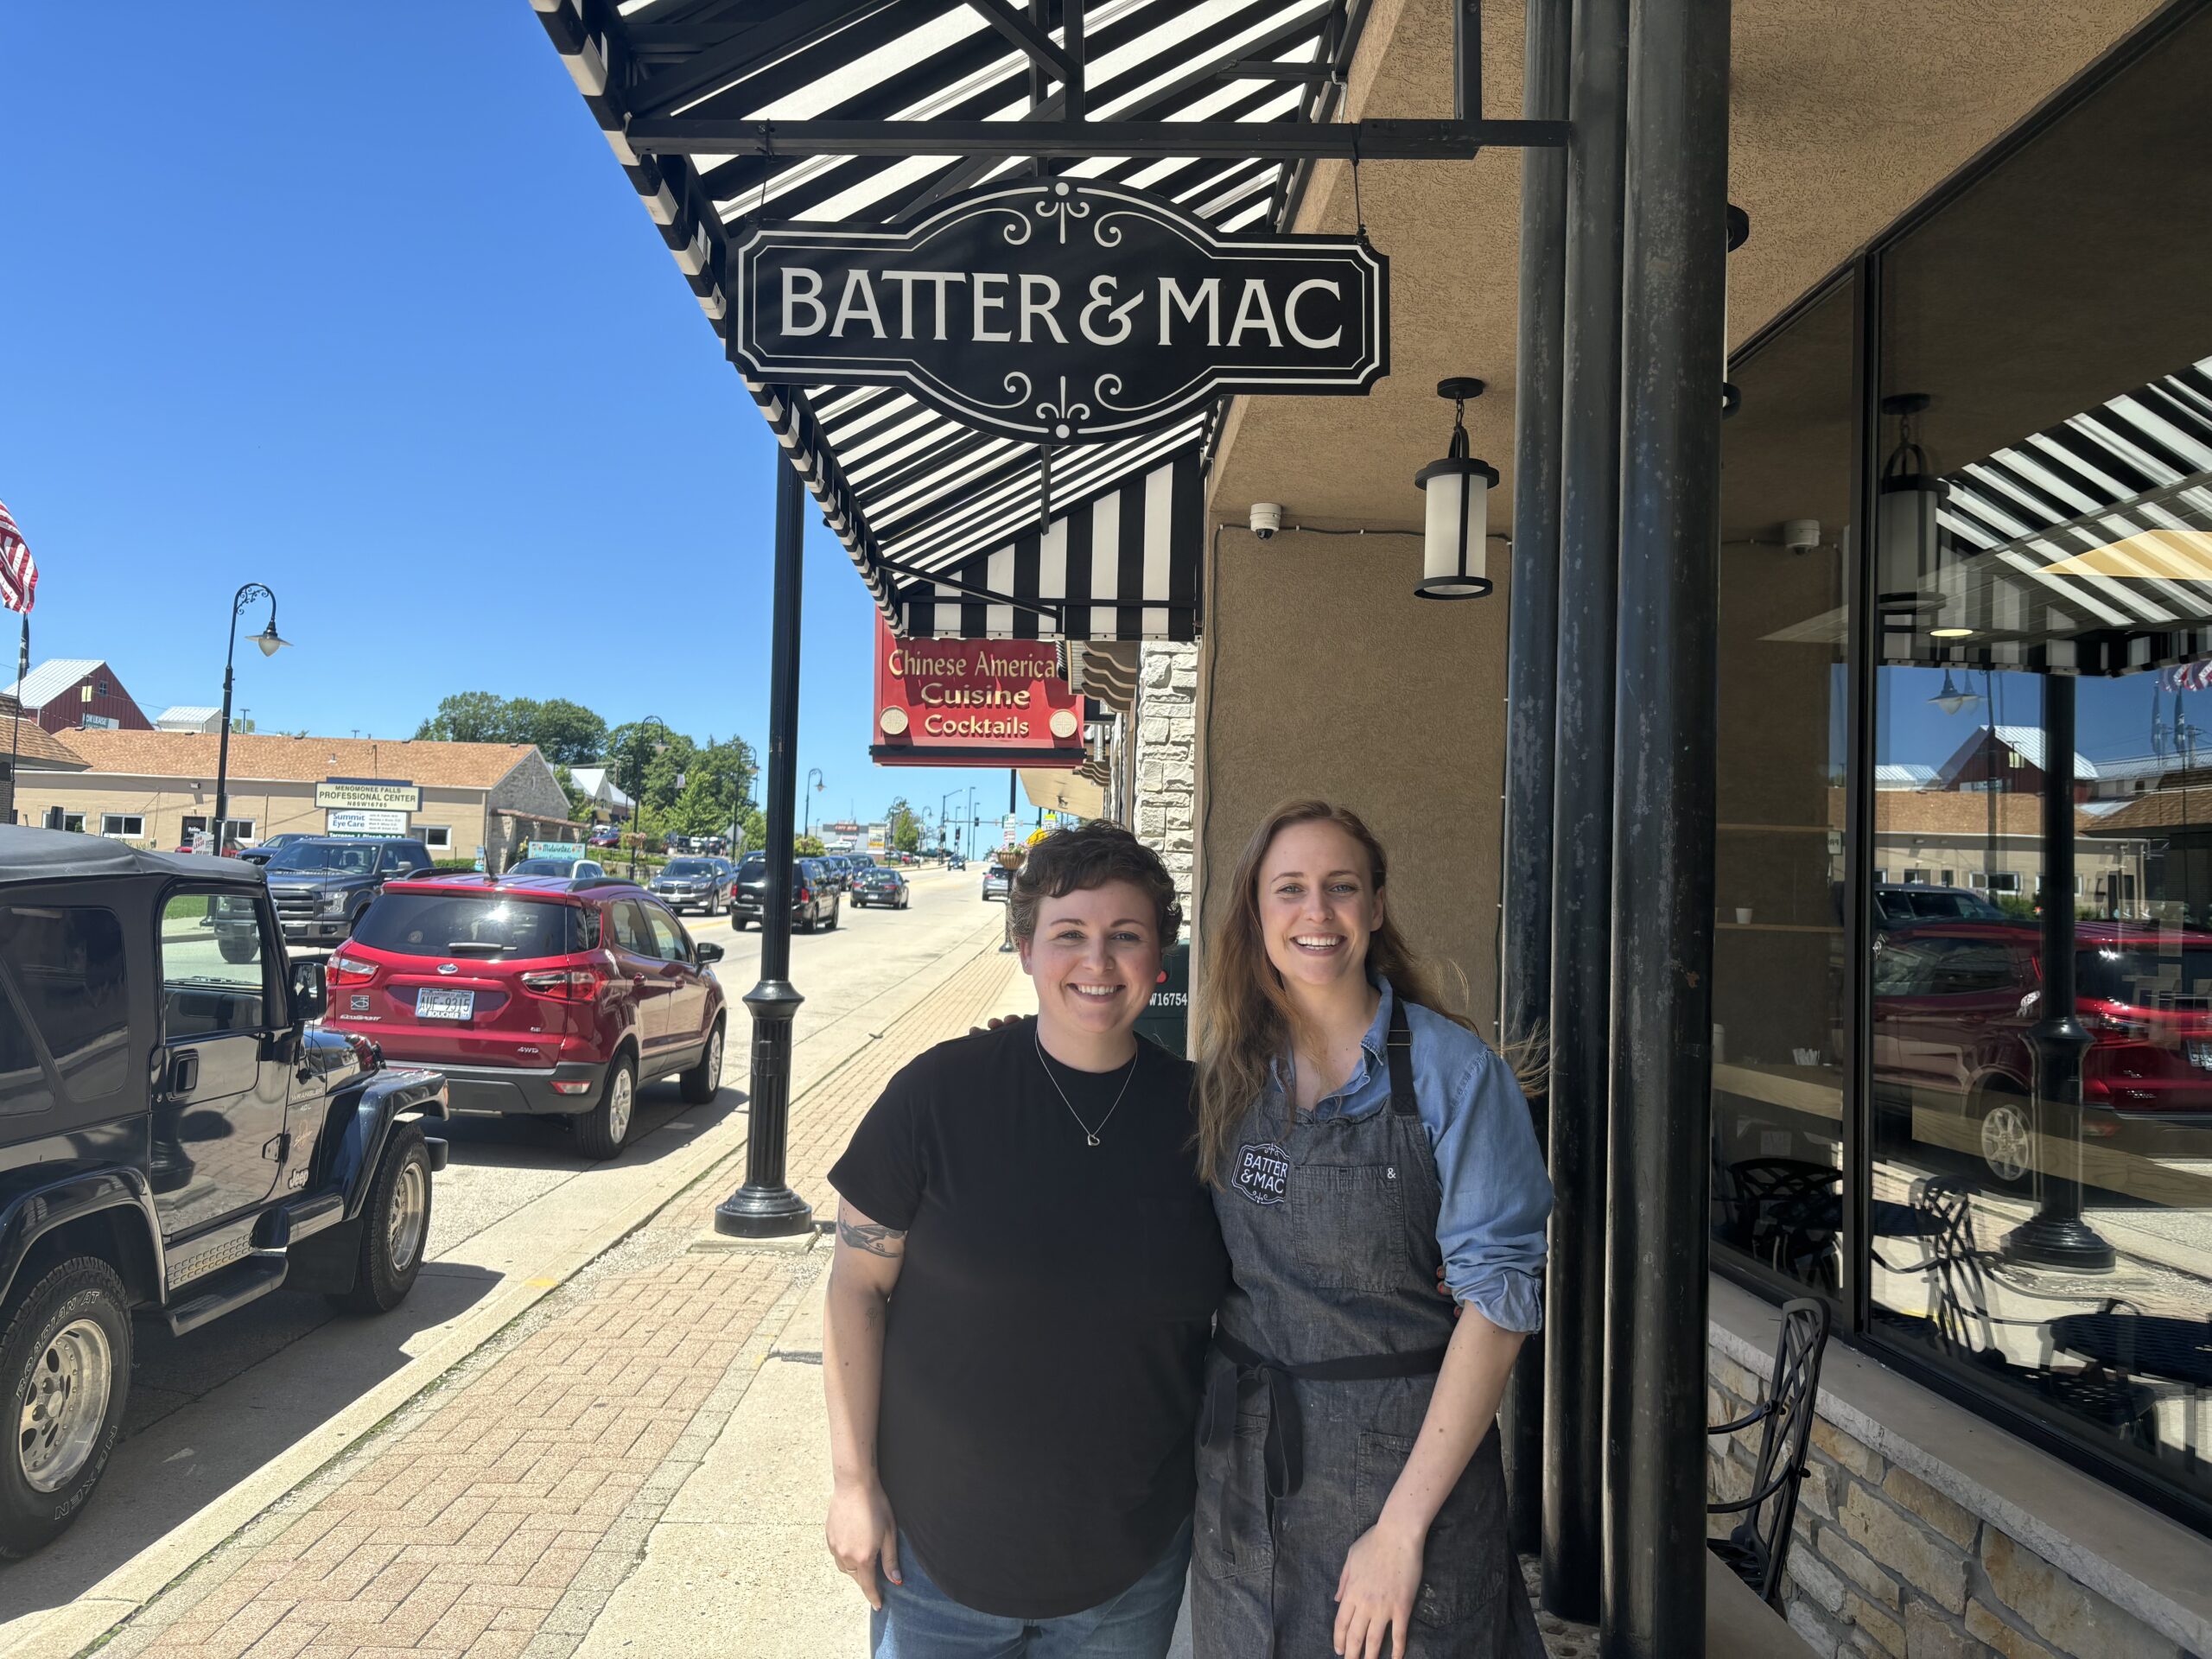 Wisconsin bakery continues Pride Month fundraisers despite backlash